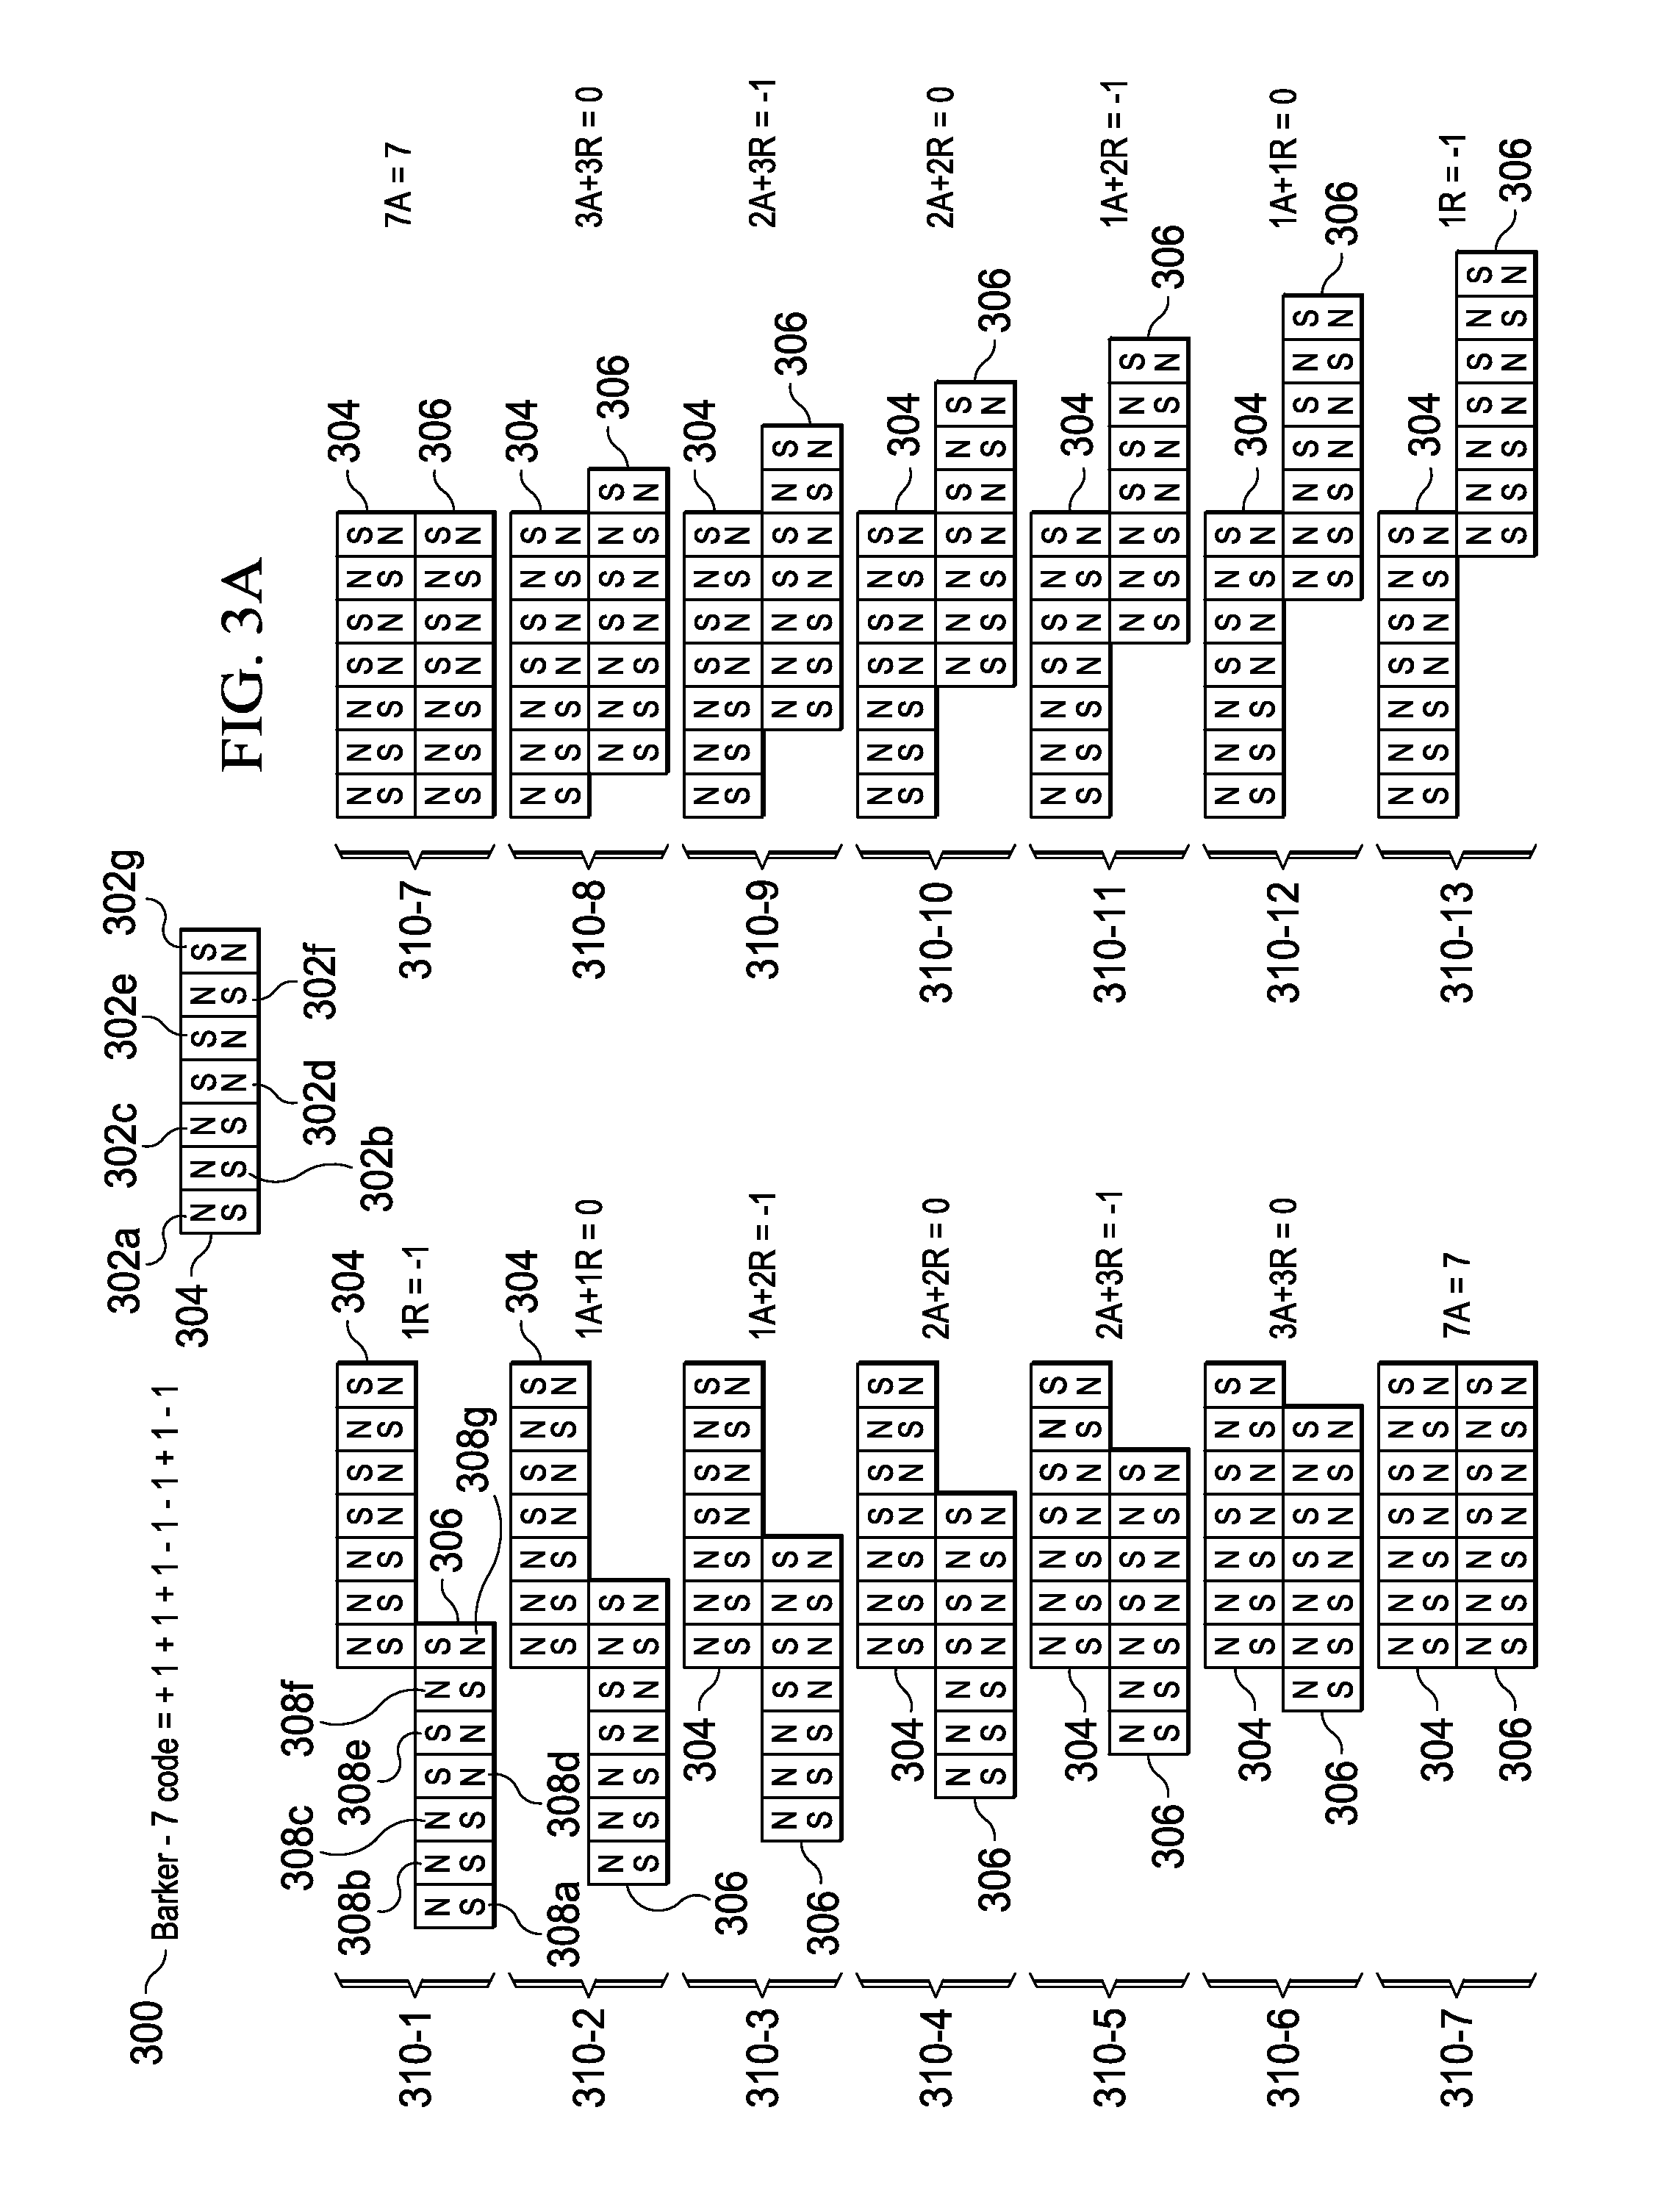 Correlated magnetic light and method for using the correlated magnetic light